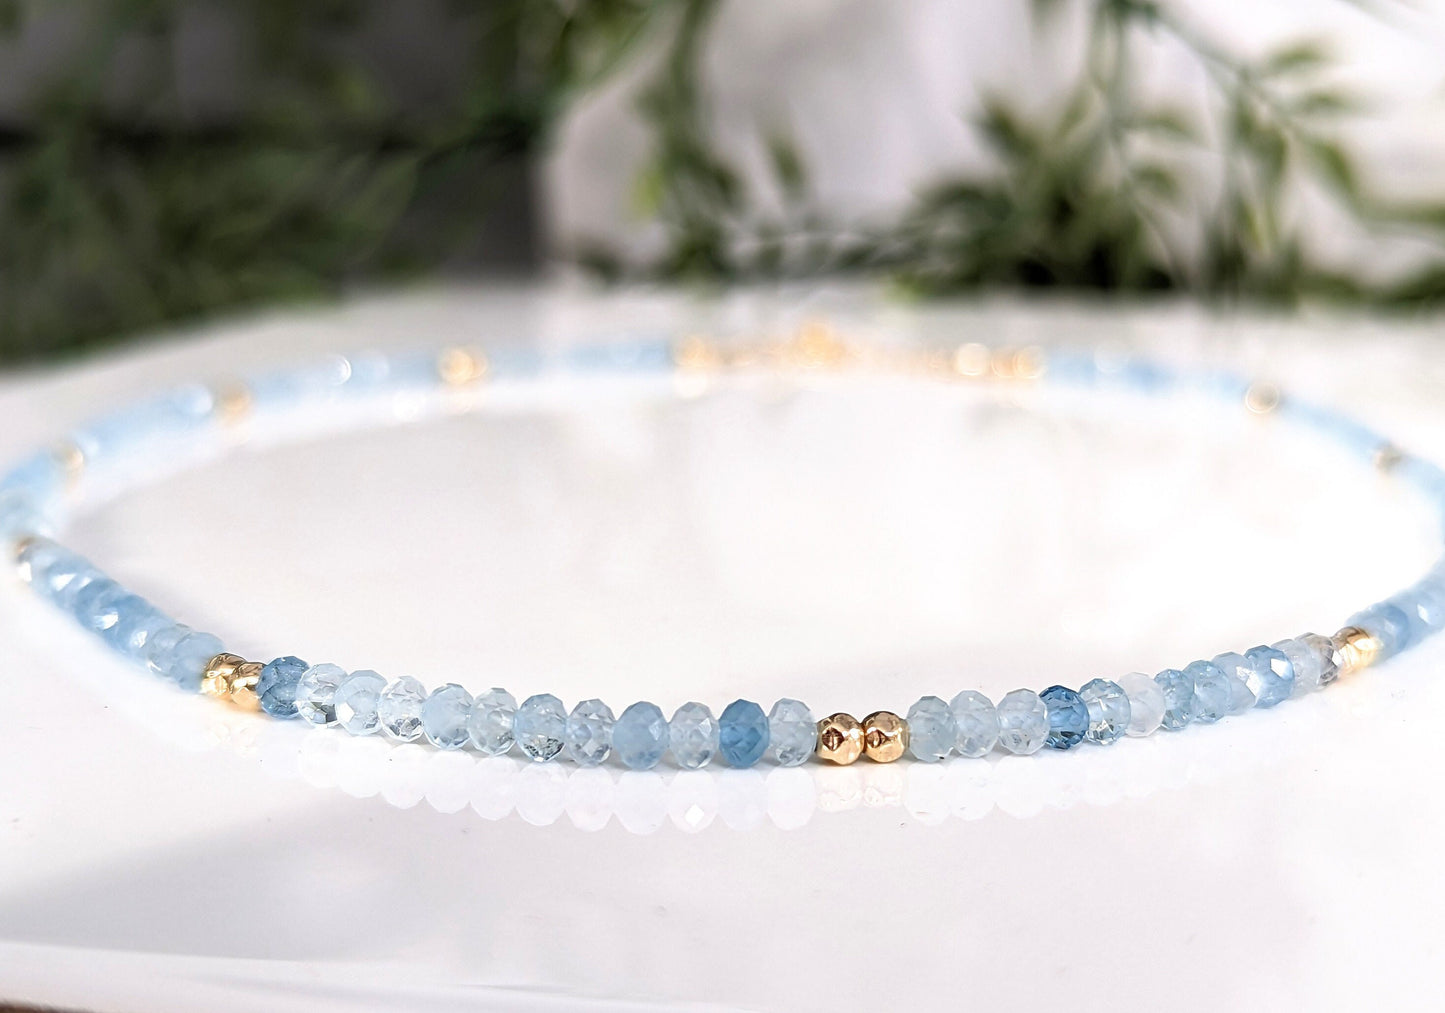 Aquamarine Bead Necklace with 14k Gold components